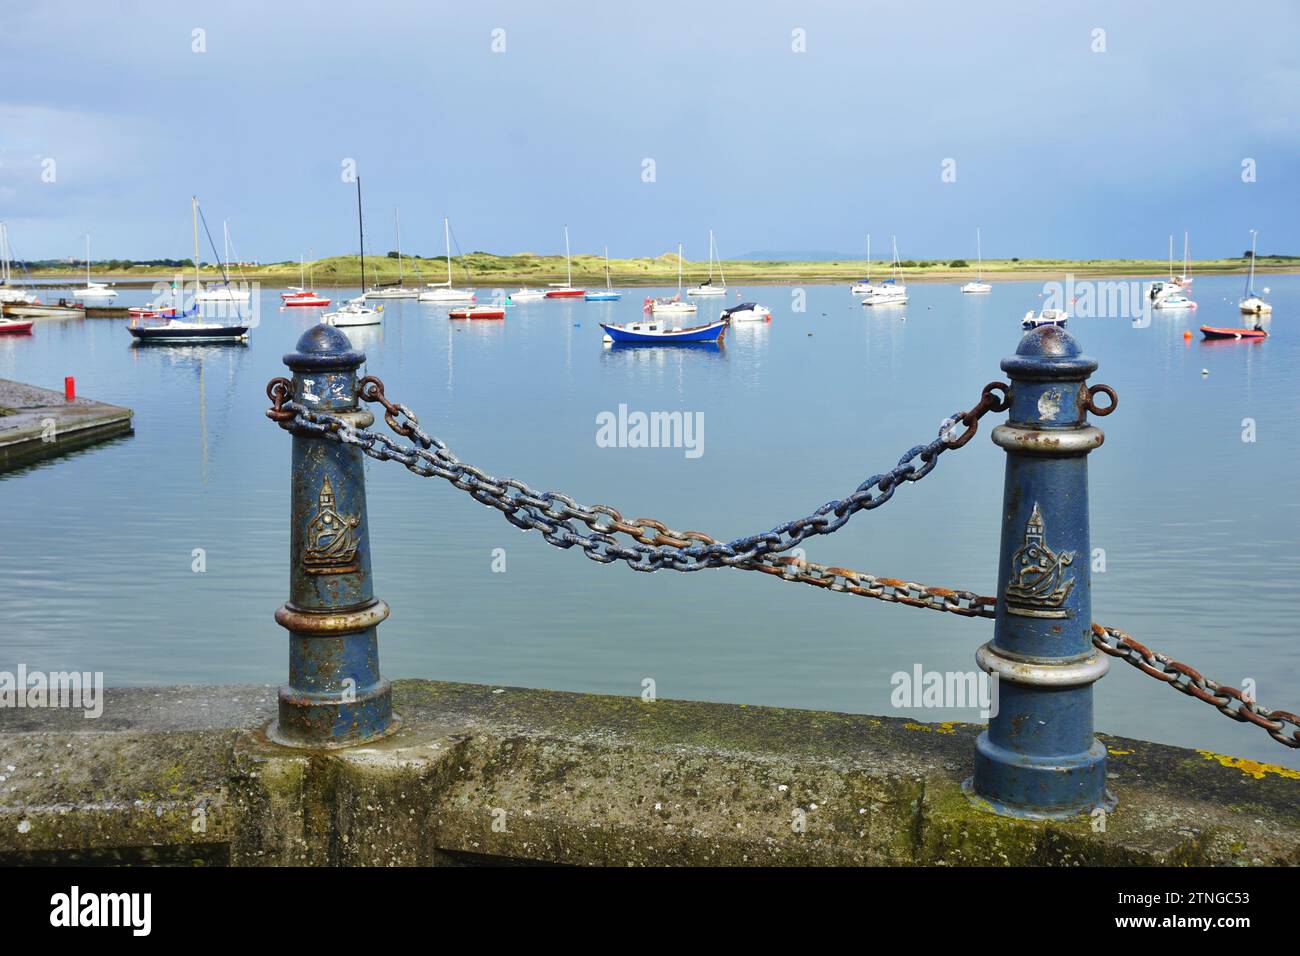 Vintage iron mooring posts frame the view of colorful sailboats at anchor in the protected bay at Malahide Marina on a bright overcast summer day. Stock Photo